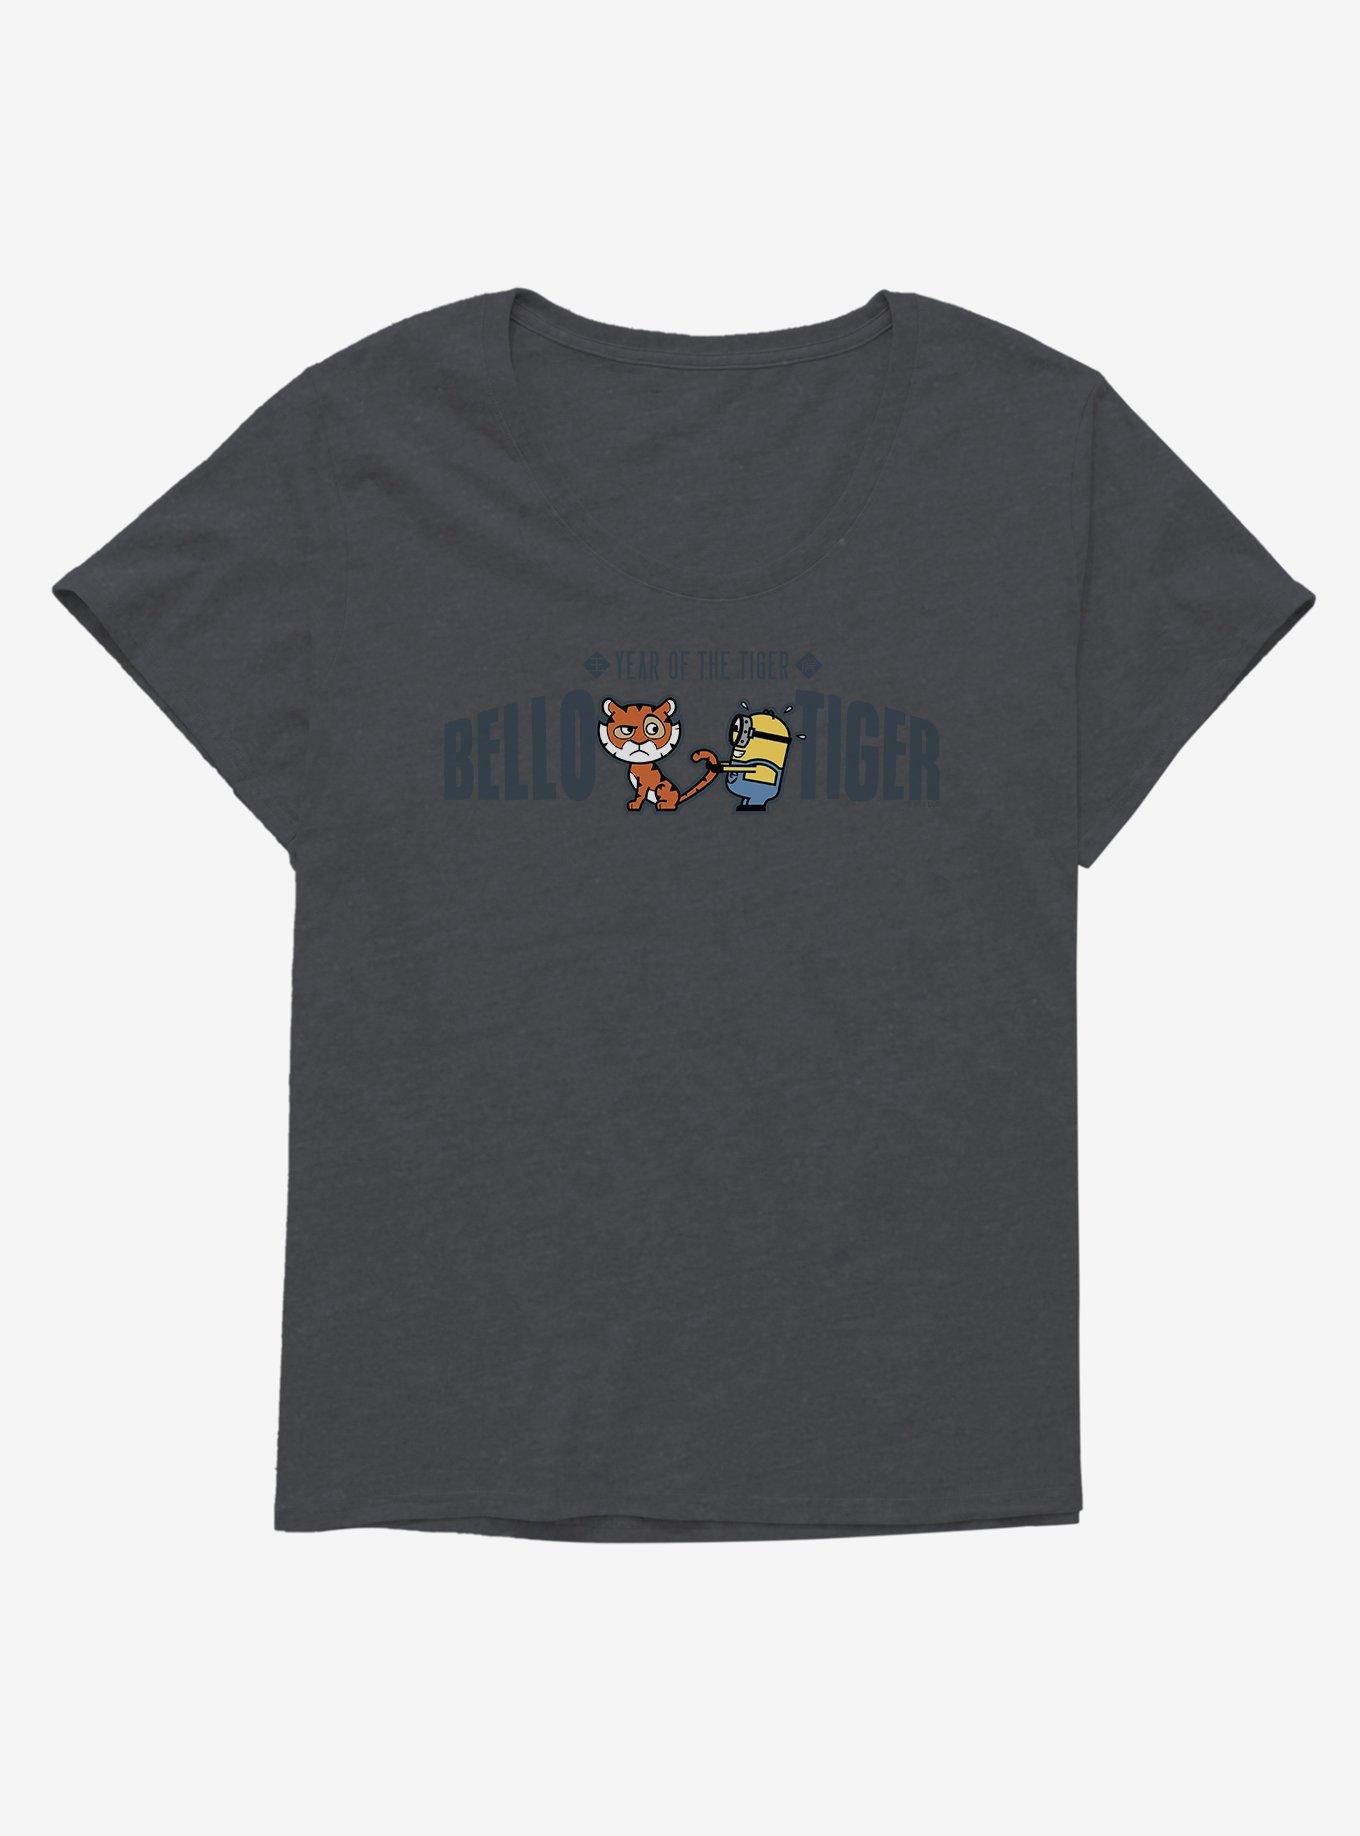 Minions Year of the Tiger Bello Style Girls T-Shirt Plus Size, , hi-res